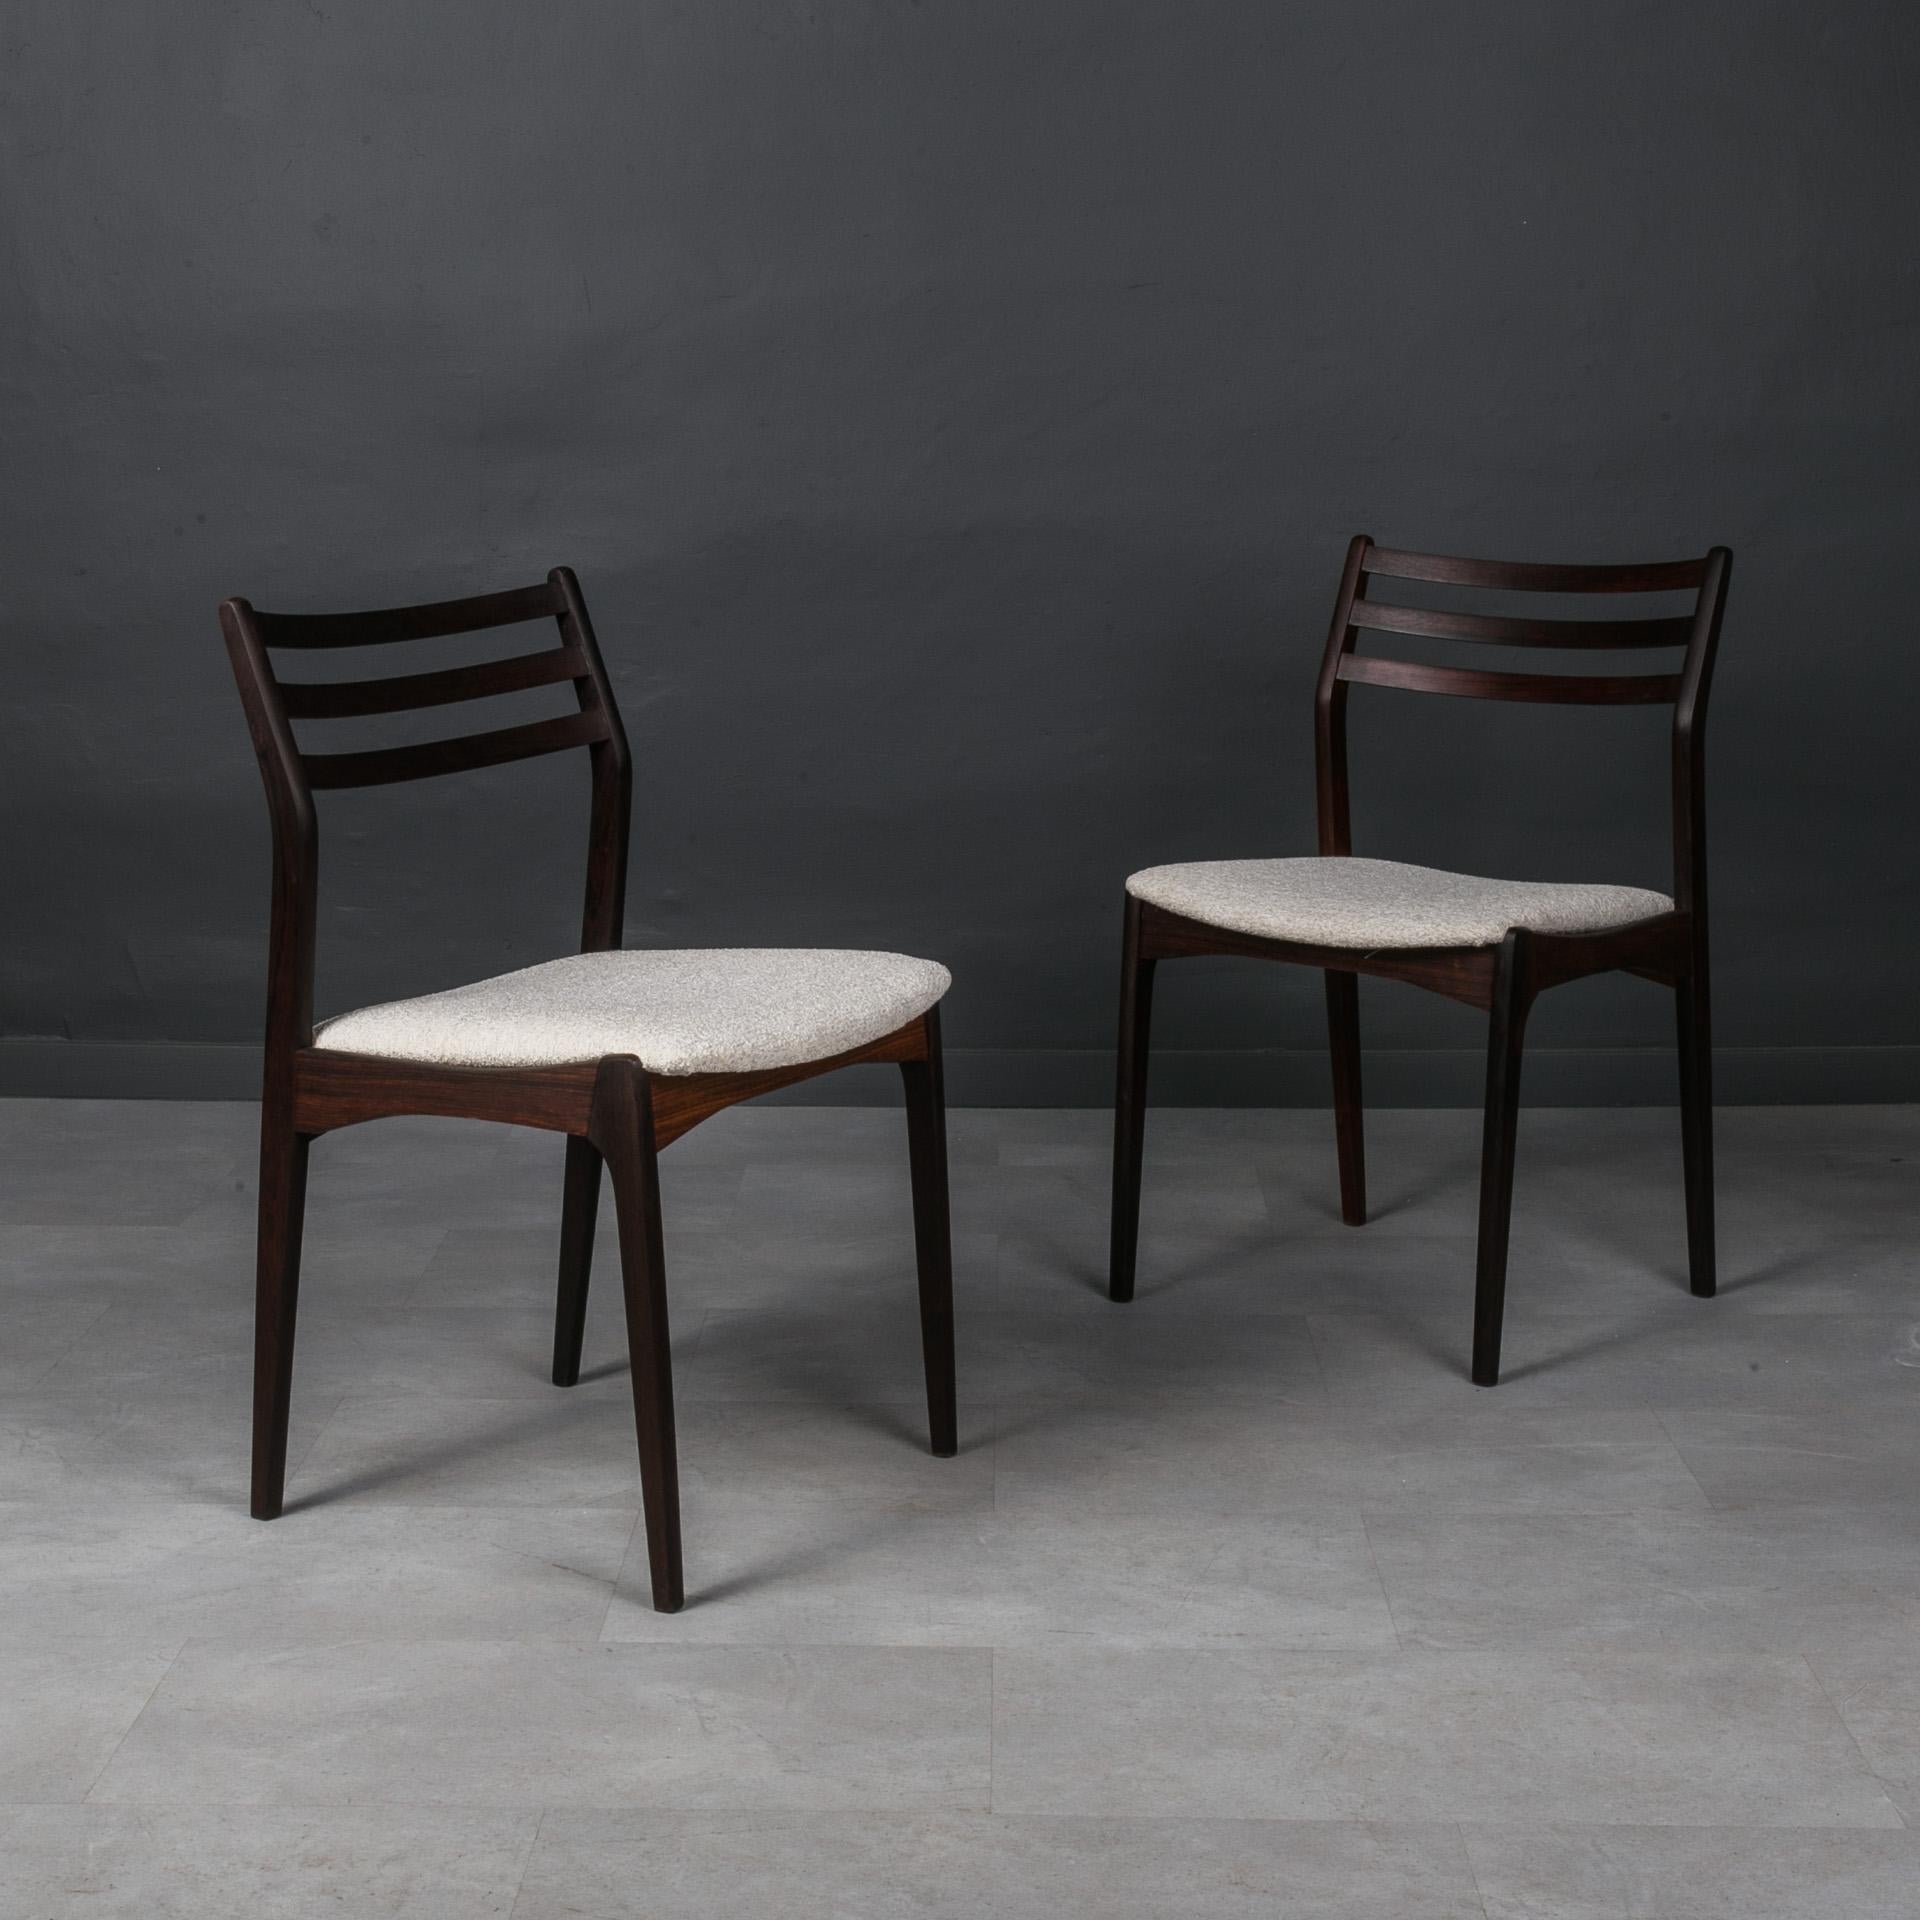 Bentwood Set of 4 Dining Chairs by Vestervig Eriksen, 1960s, Fully Renovated